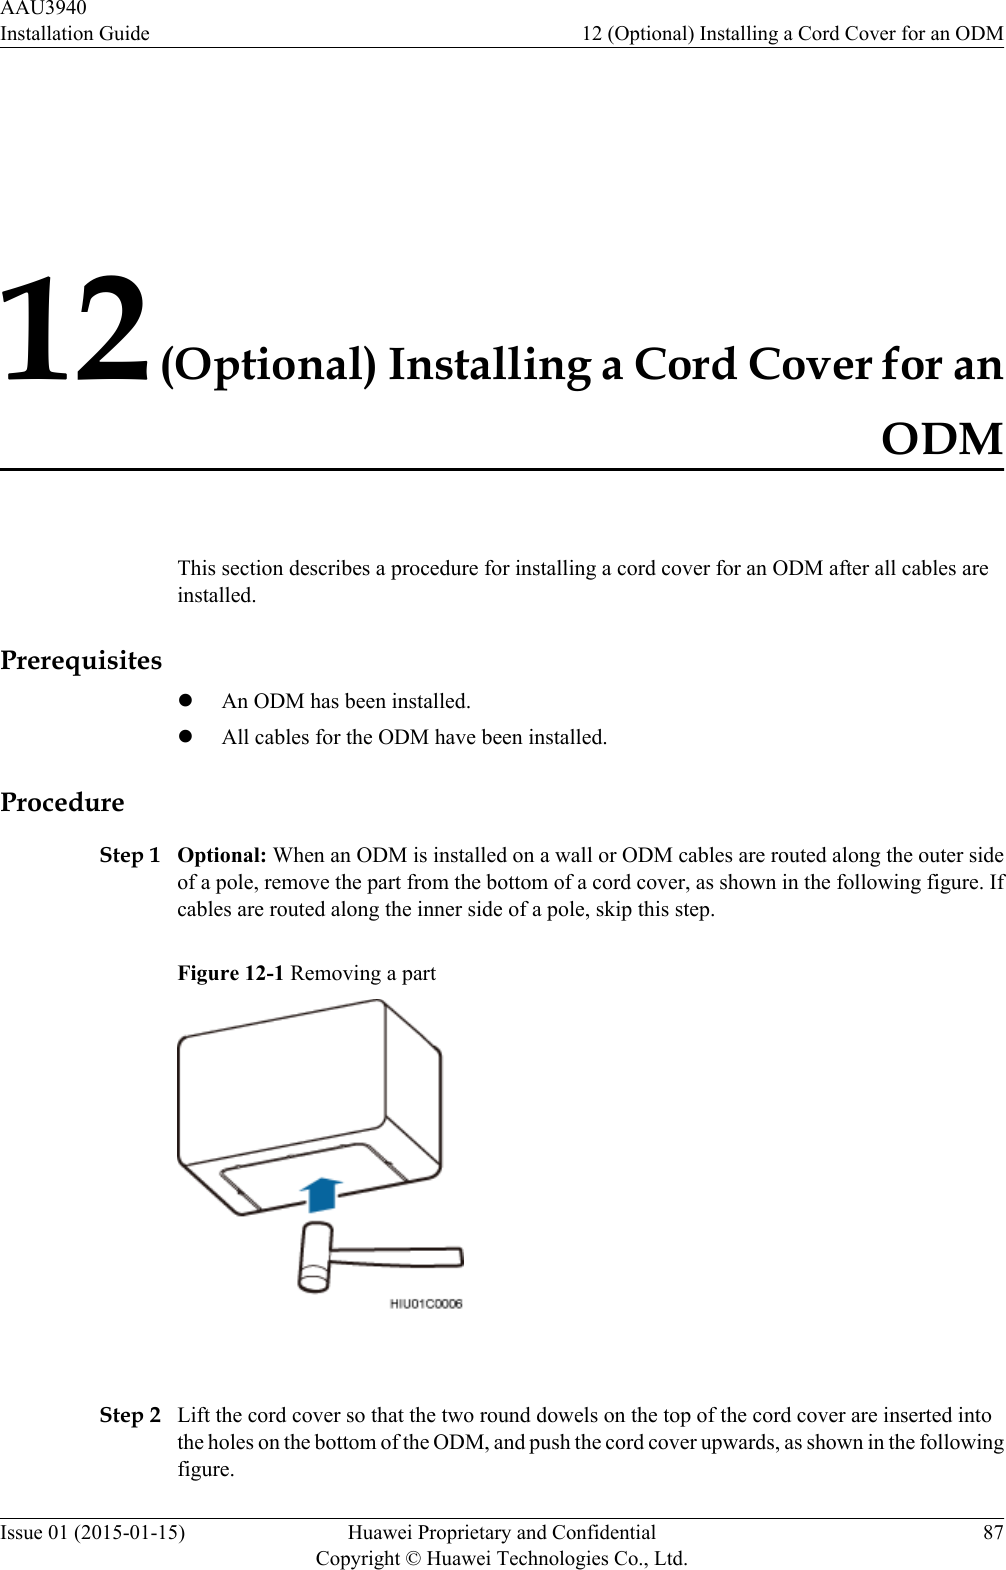 12 (Optional) Installing a Cord Cover for anODMThis section describes a procedure for installing a cord cover for an ODM after all cables areinstalled.PrerequisiteslAn ODM has been installed.lAll cables for the ODM have been installed.ProcedureStep 1 Optional: When an ODM is installed on a wall or ODM cables are routed along the outer sideof a pole, remove the part from the bottom of a cord cover, as shown in the following figure. Ifcables are routed along the inner side of a pole, skip this step.Figure 12-1 Removing a part Step 2 Lift the cord cover so that the two round dowels on the top of the cord cover are inserted intothe holes on the bottom of the ODM, and push the cord cover upwards, as shown in the followingfigure.AAU3940Installation Guide 12 (Optional) Installing a Cord Cover for an ODMIssue 01 (2015-01-15) Huawei Proprietary and ConfidentialCopyright © Huawei Technologies Co., Ltd.87